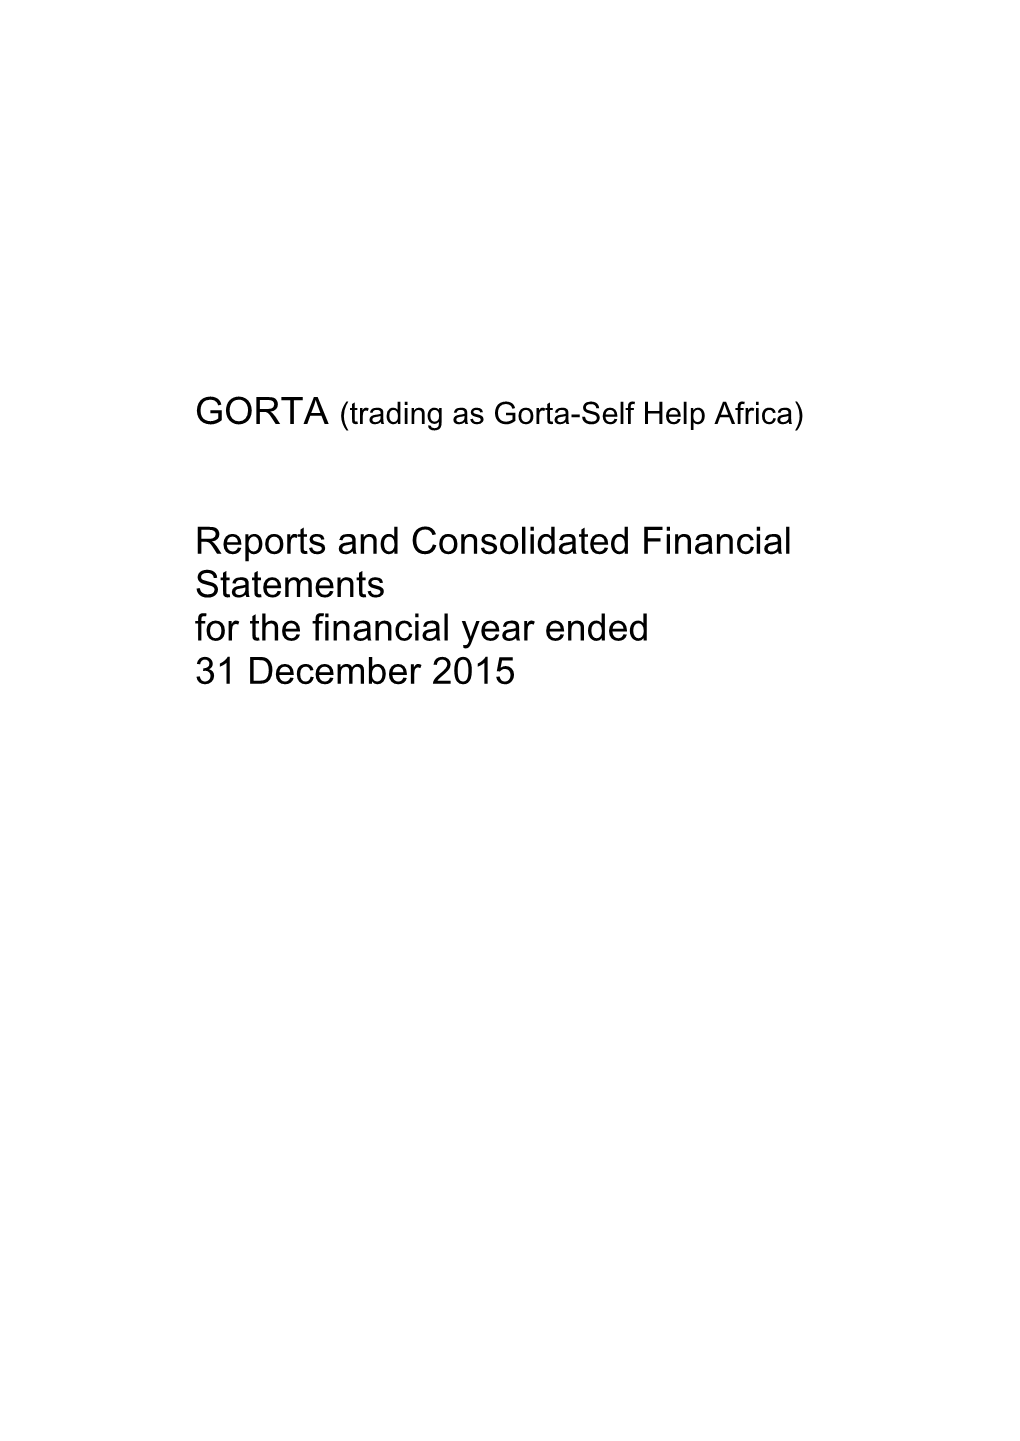 Reports and Consolidated Financial Statements for the Financial Year Ended 31 December 2015